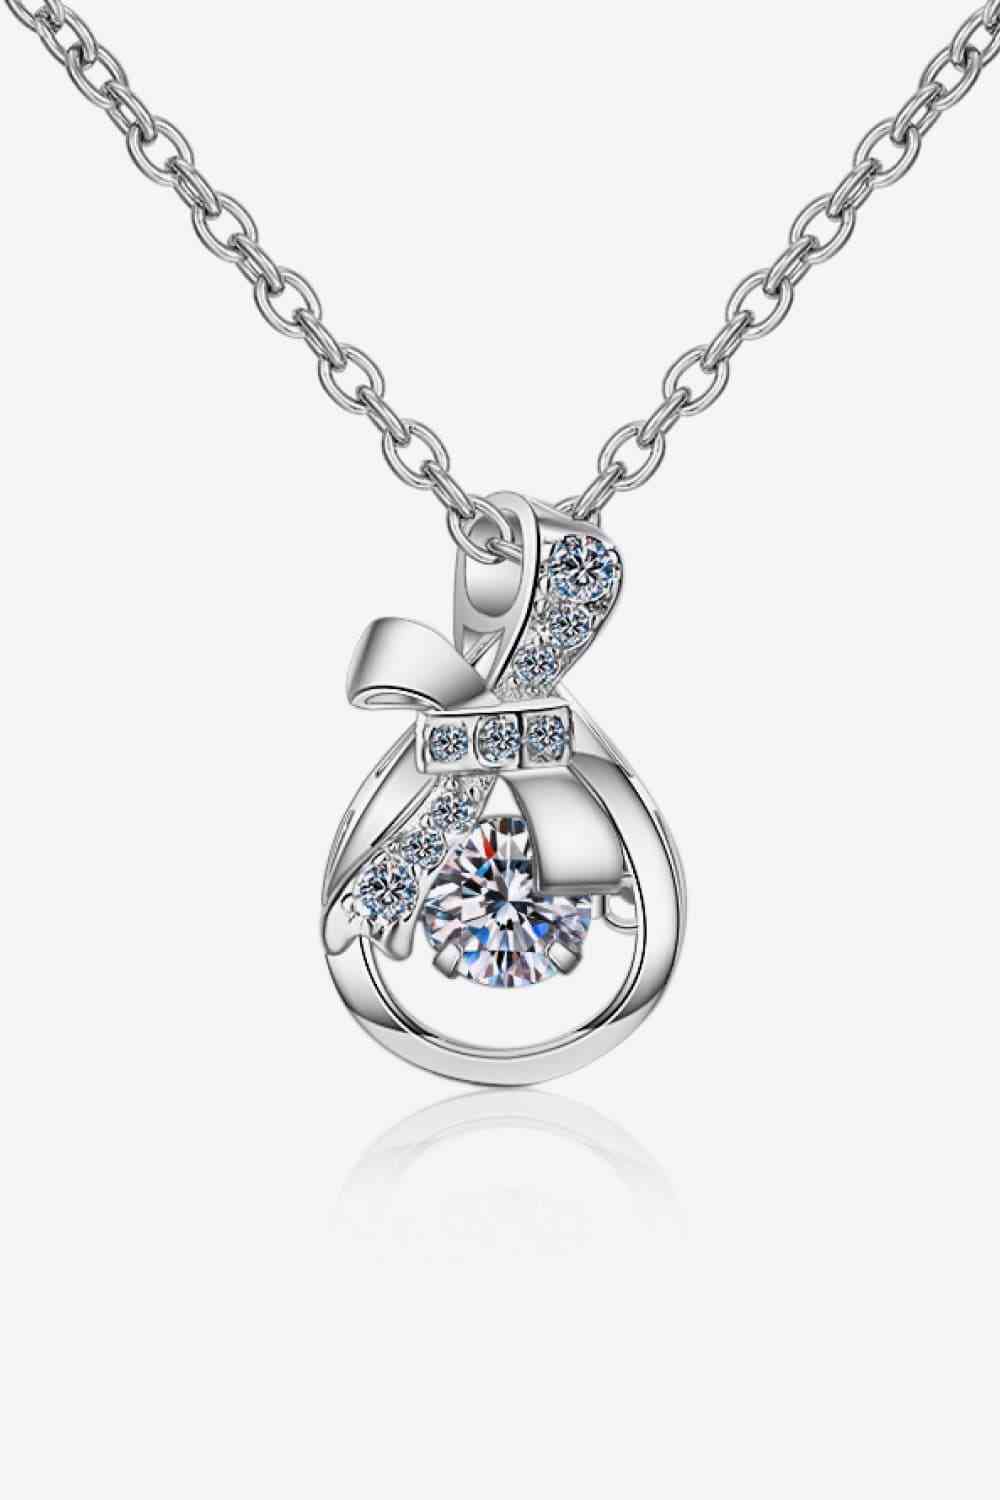 1 Carat Moissanite 925 Sterling Silver Bow Tie Necklace